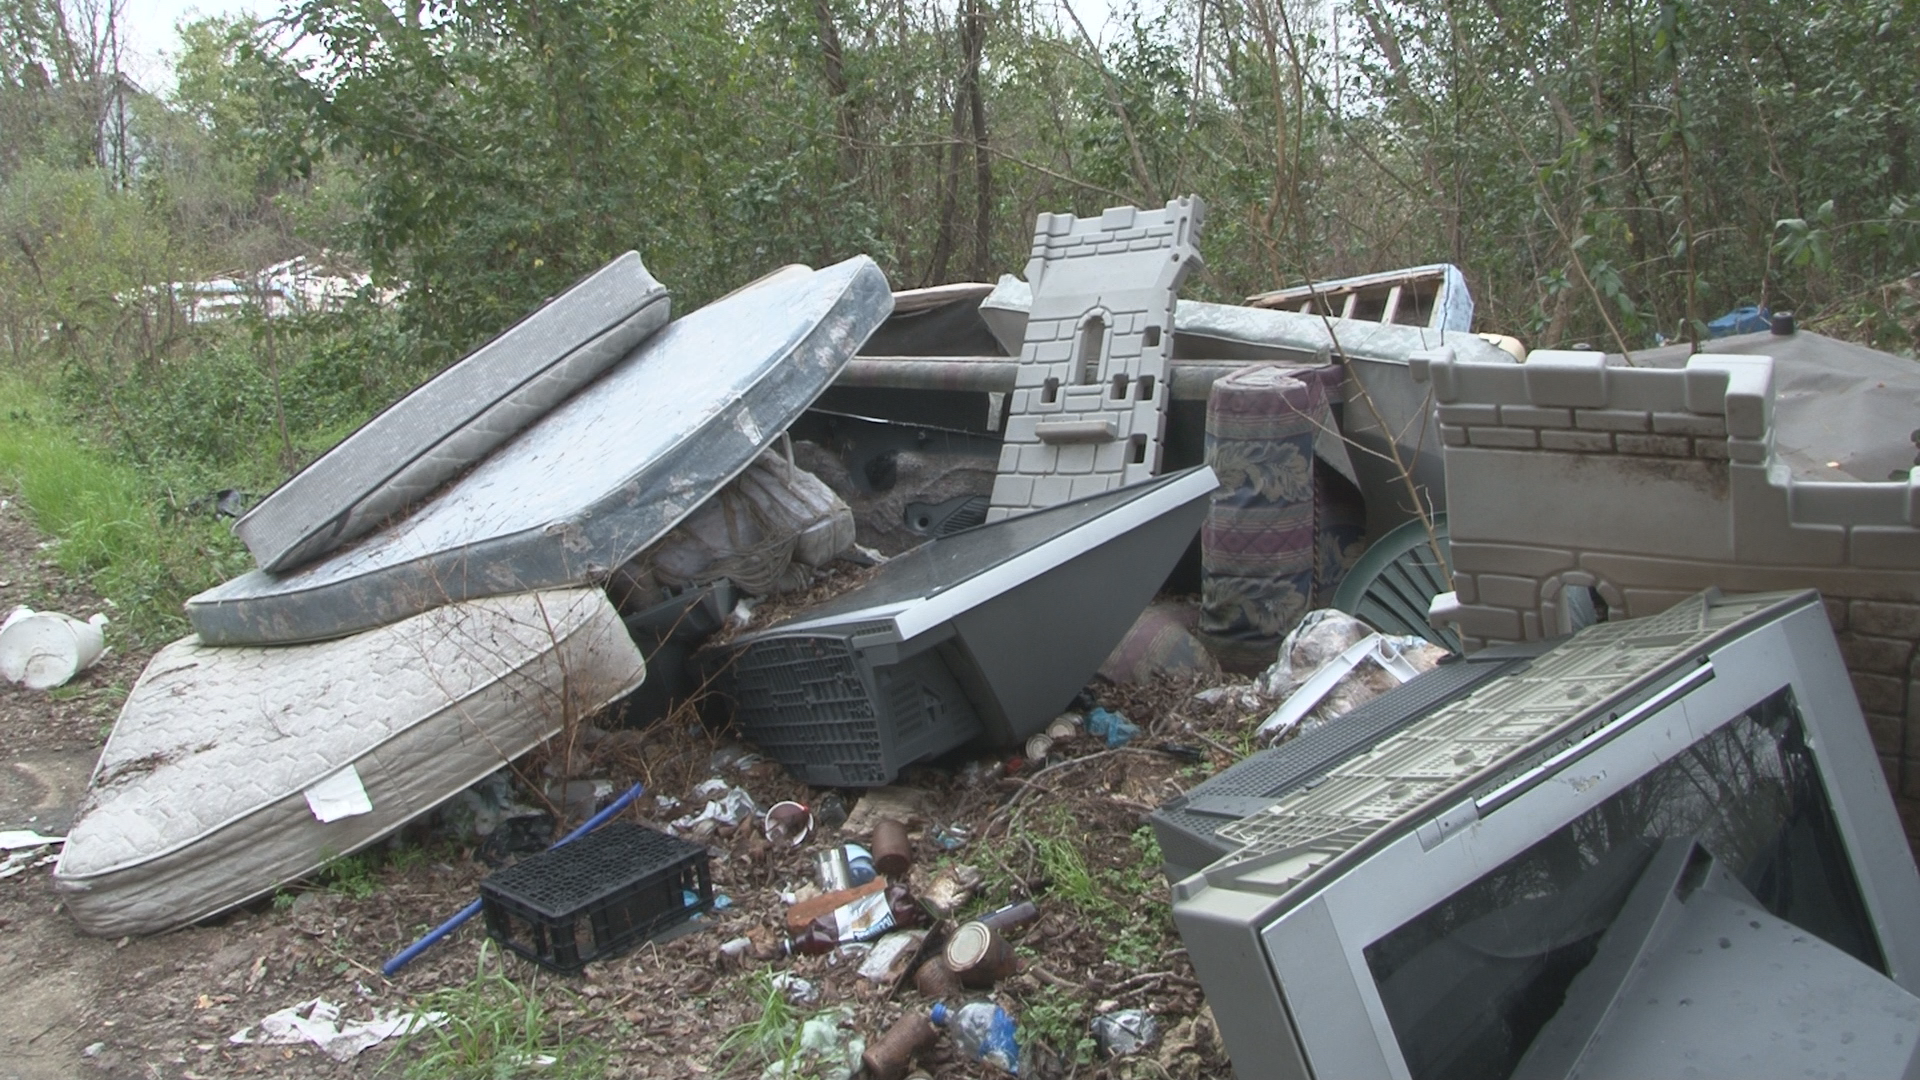 Furniture, televisions, mattresses, and toilets are some of the things dumped at Third Street Lane and Hazel Street.